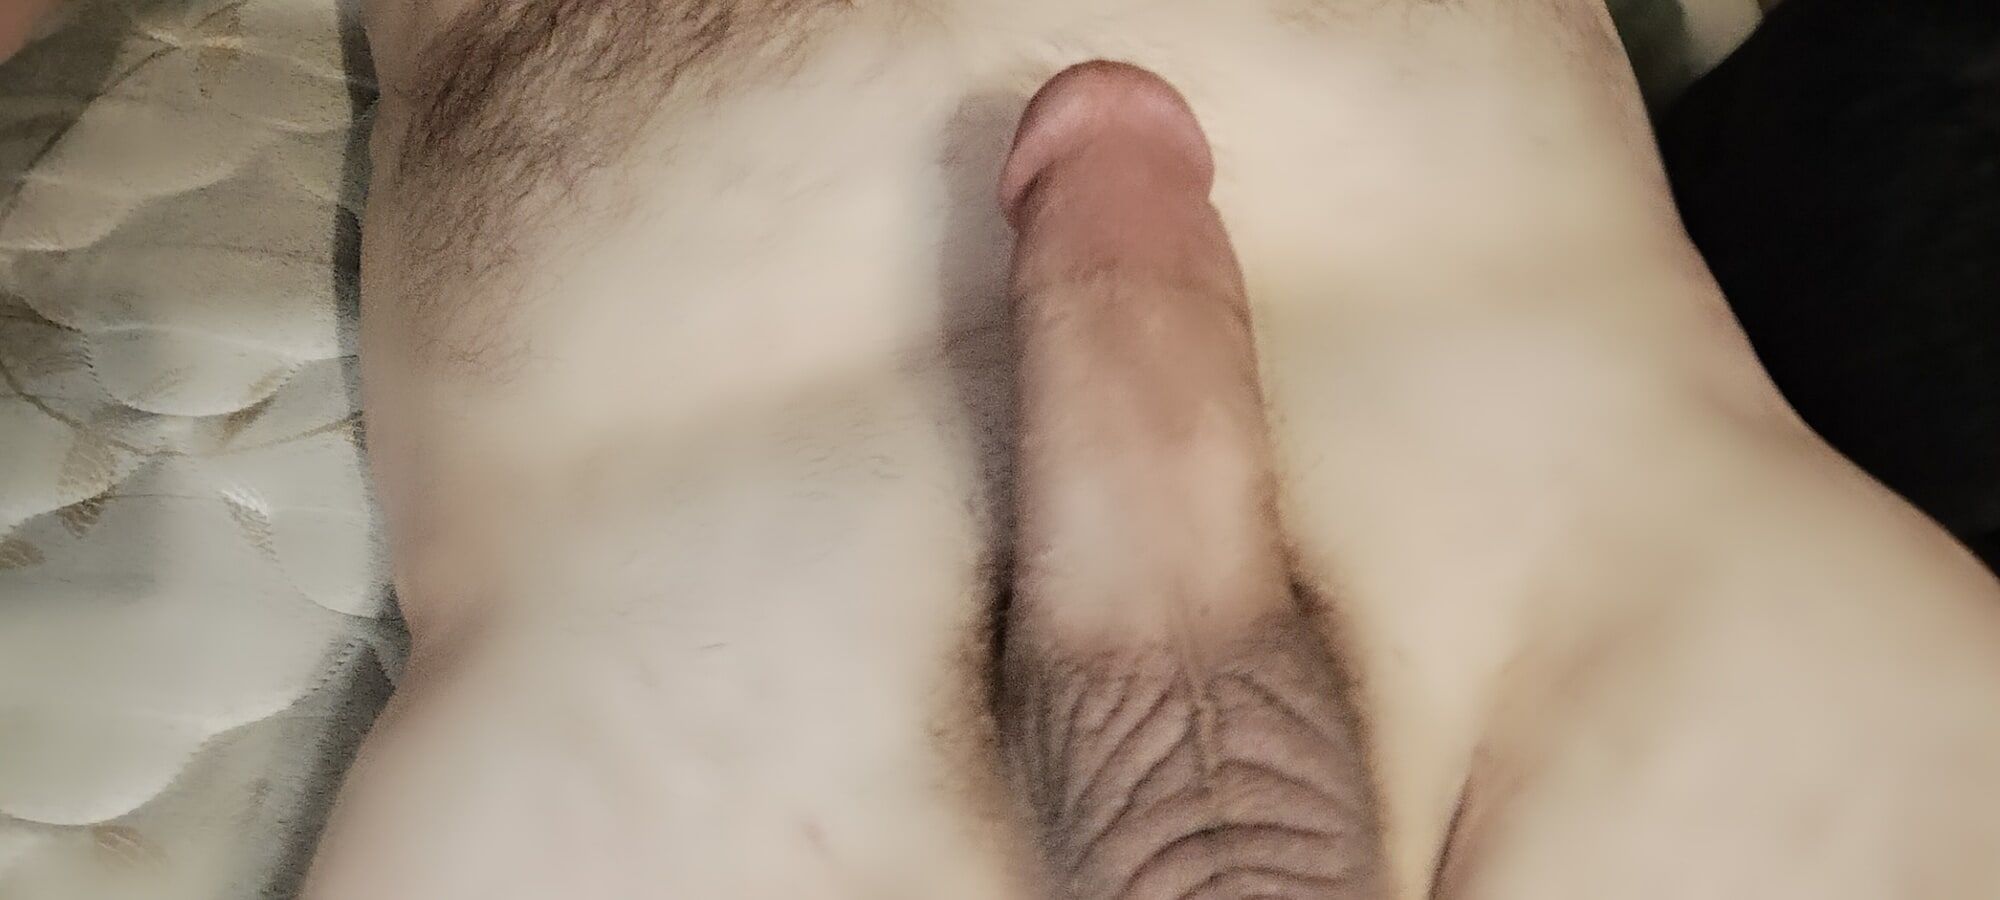 My spun self and I want any and all cocks! #7